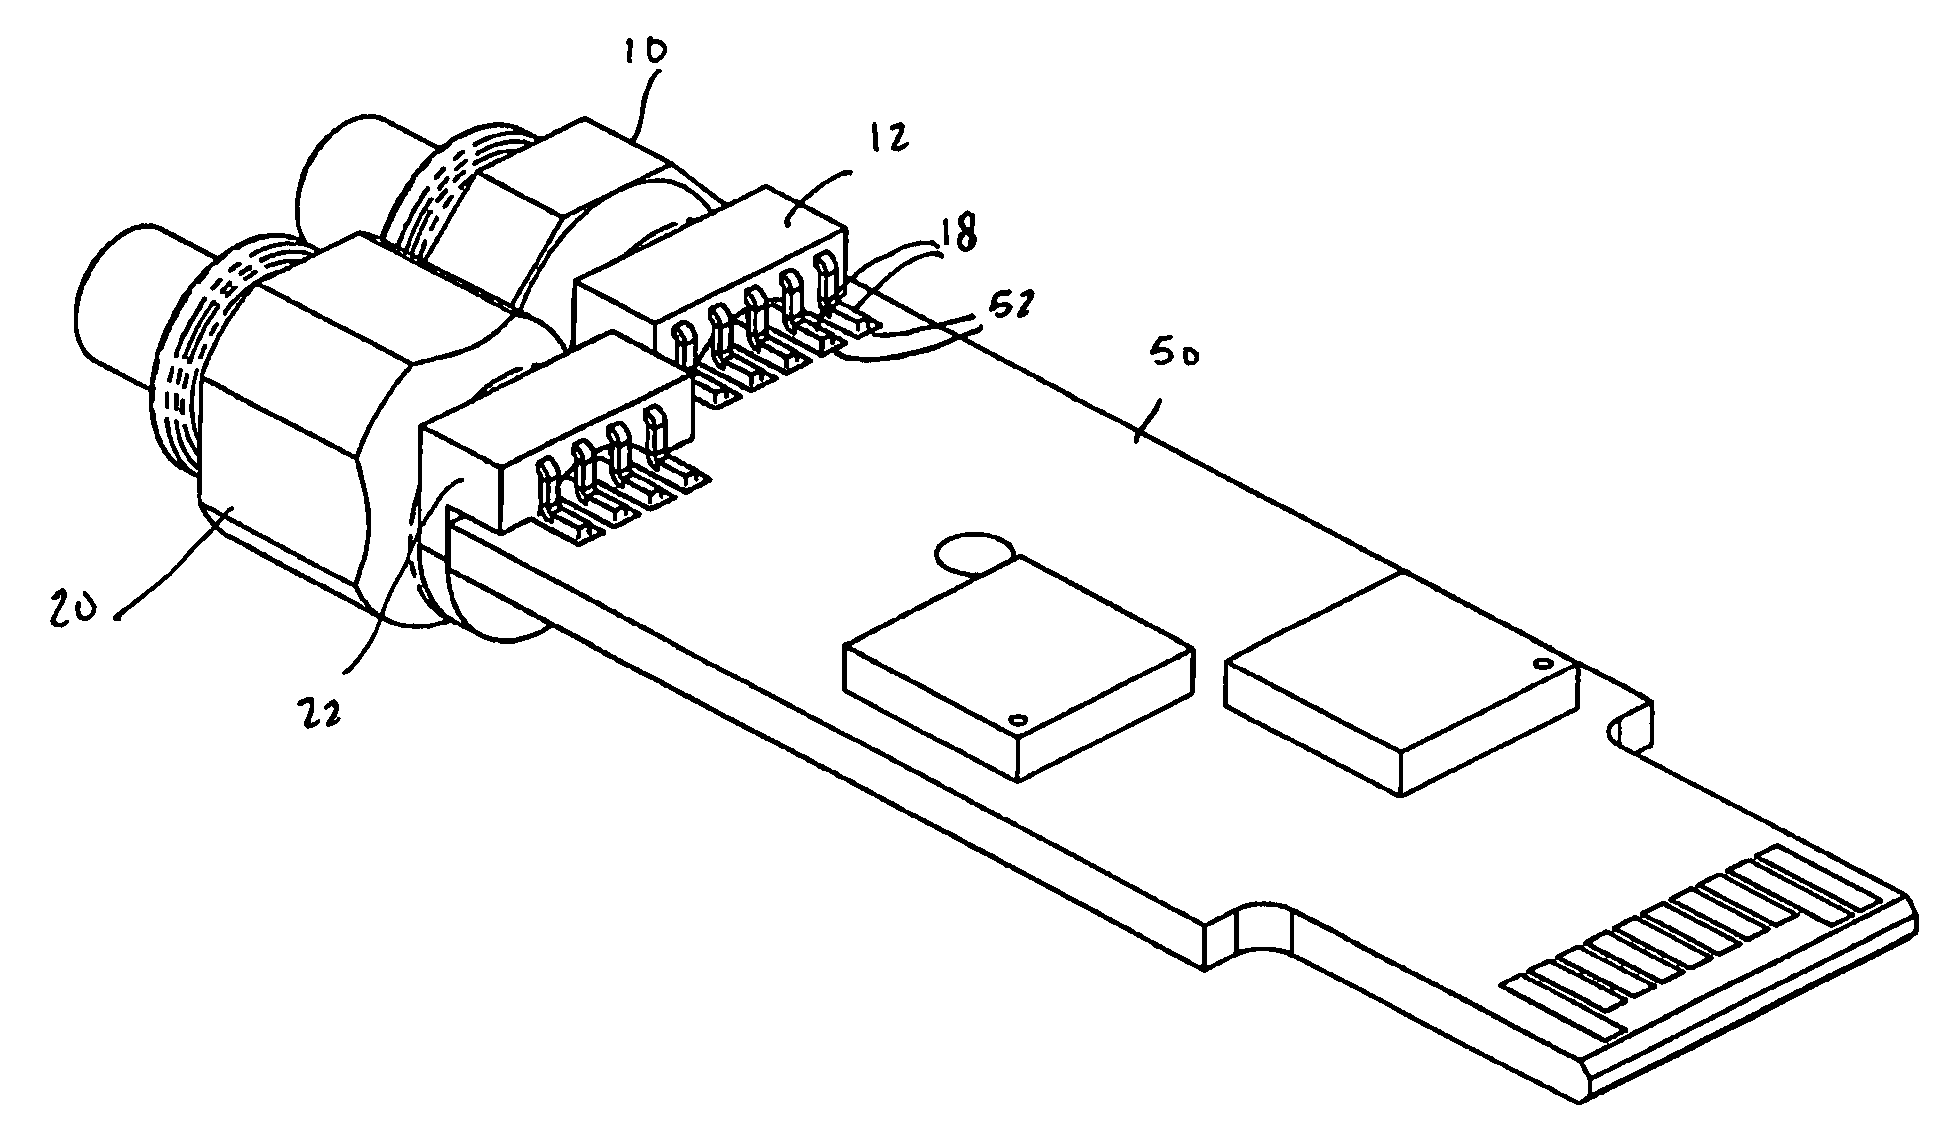 Methods for manufacturing optical modules using lead frame connectors